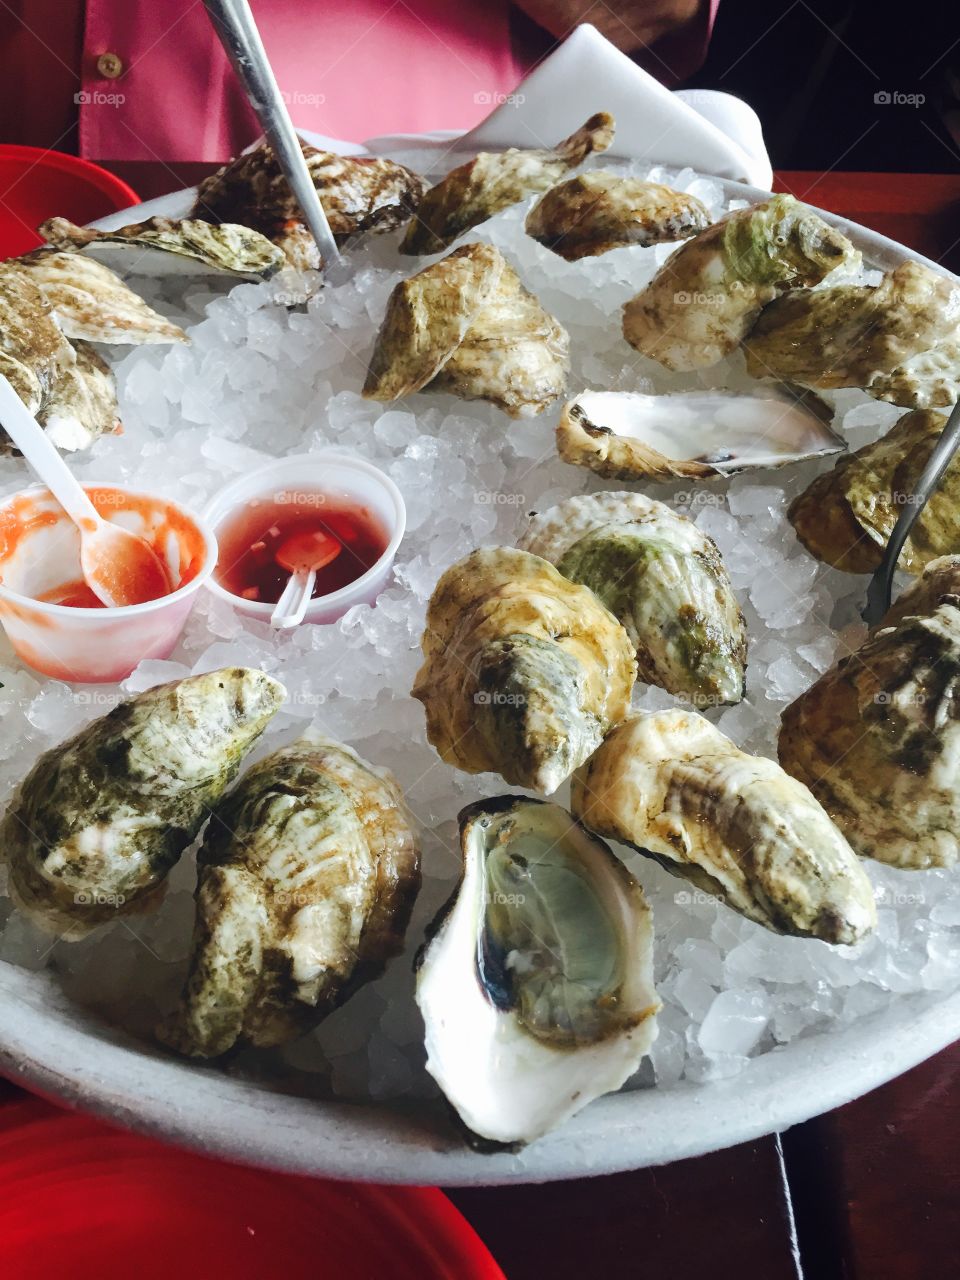 Oysters. Oysters 